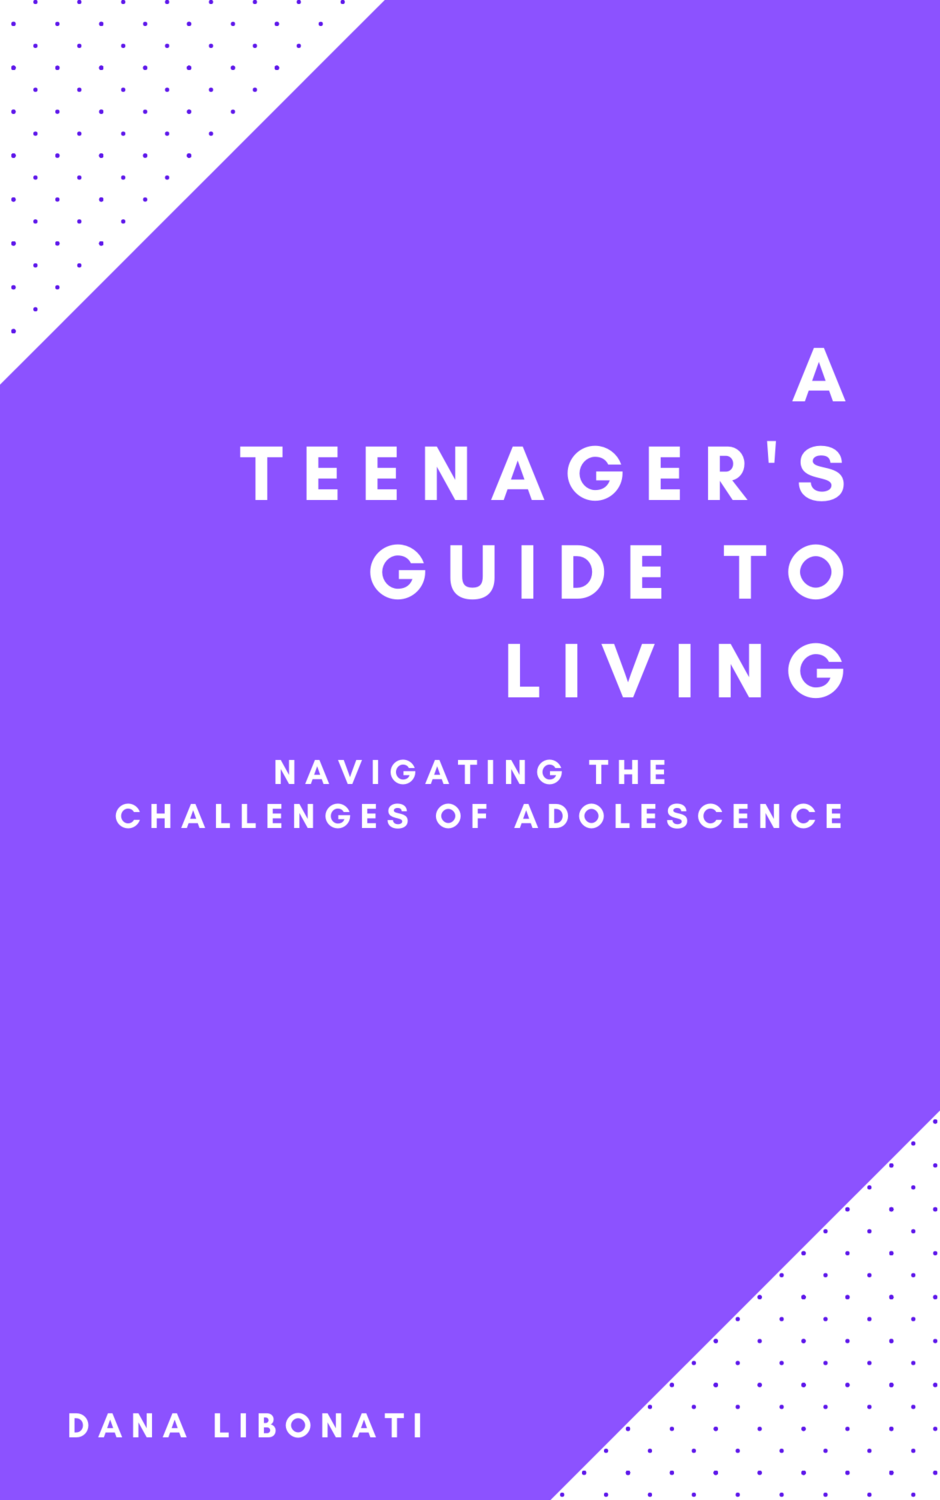 A Teenager’s Guide to Living: Navigating the Challenges of Adolescence